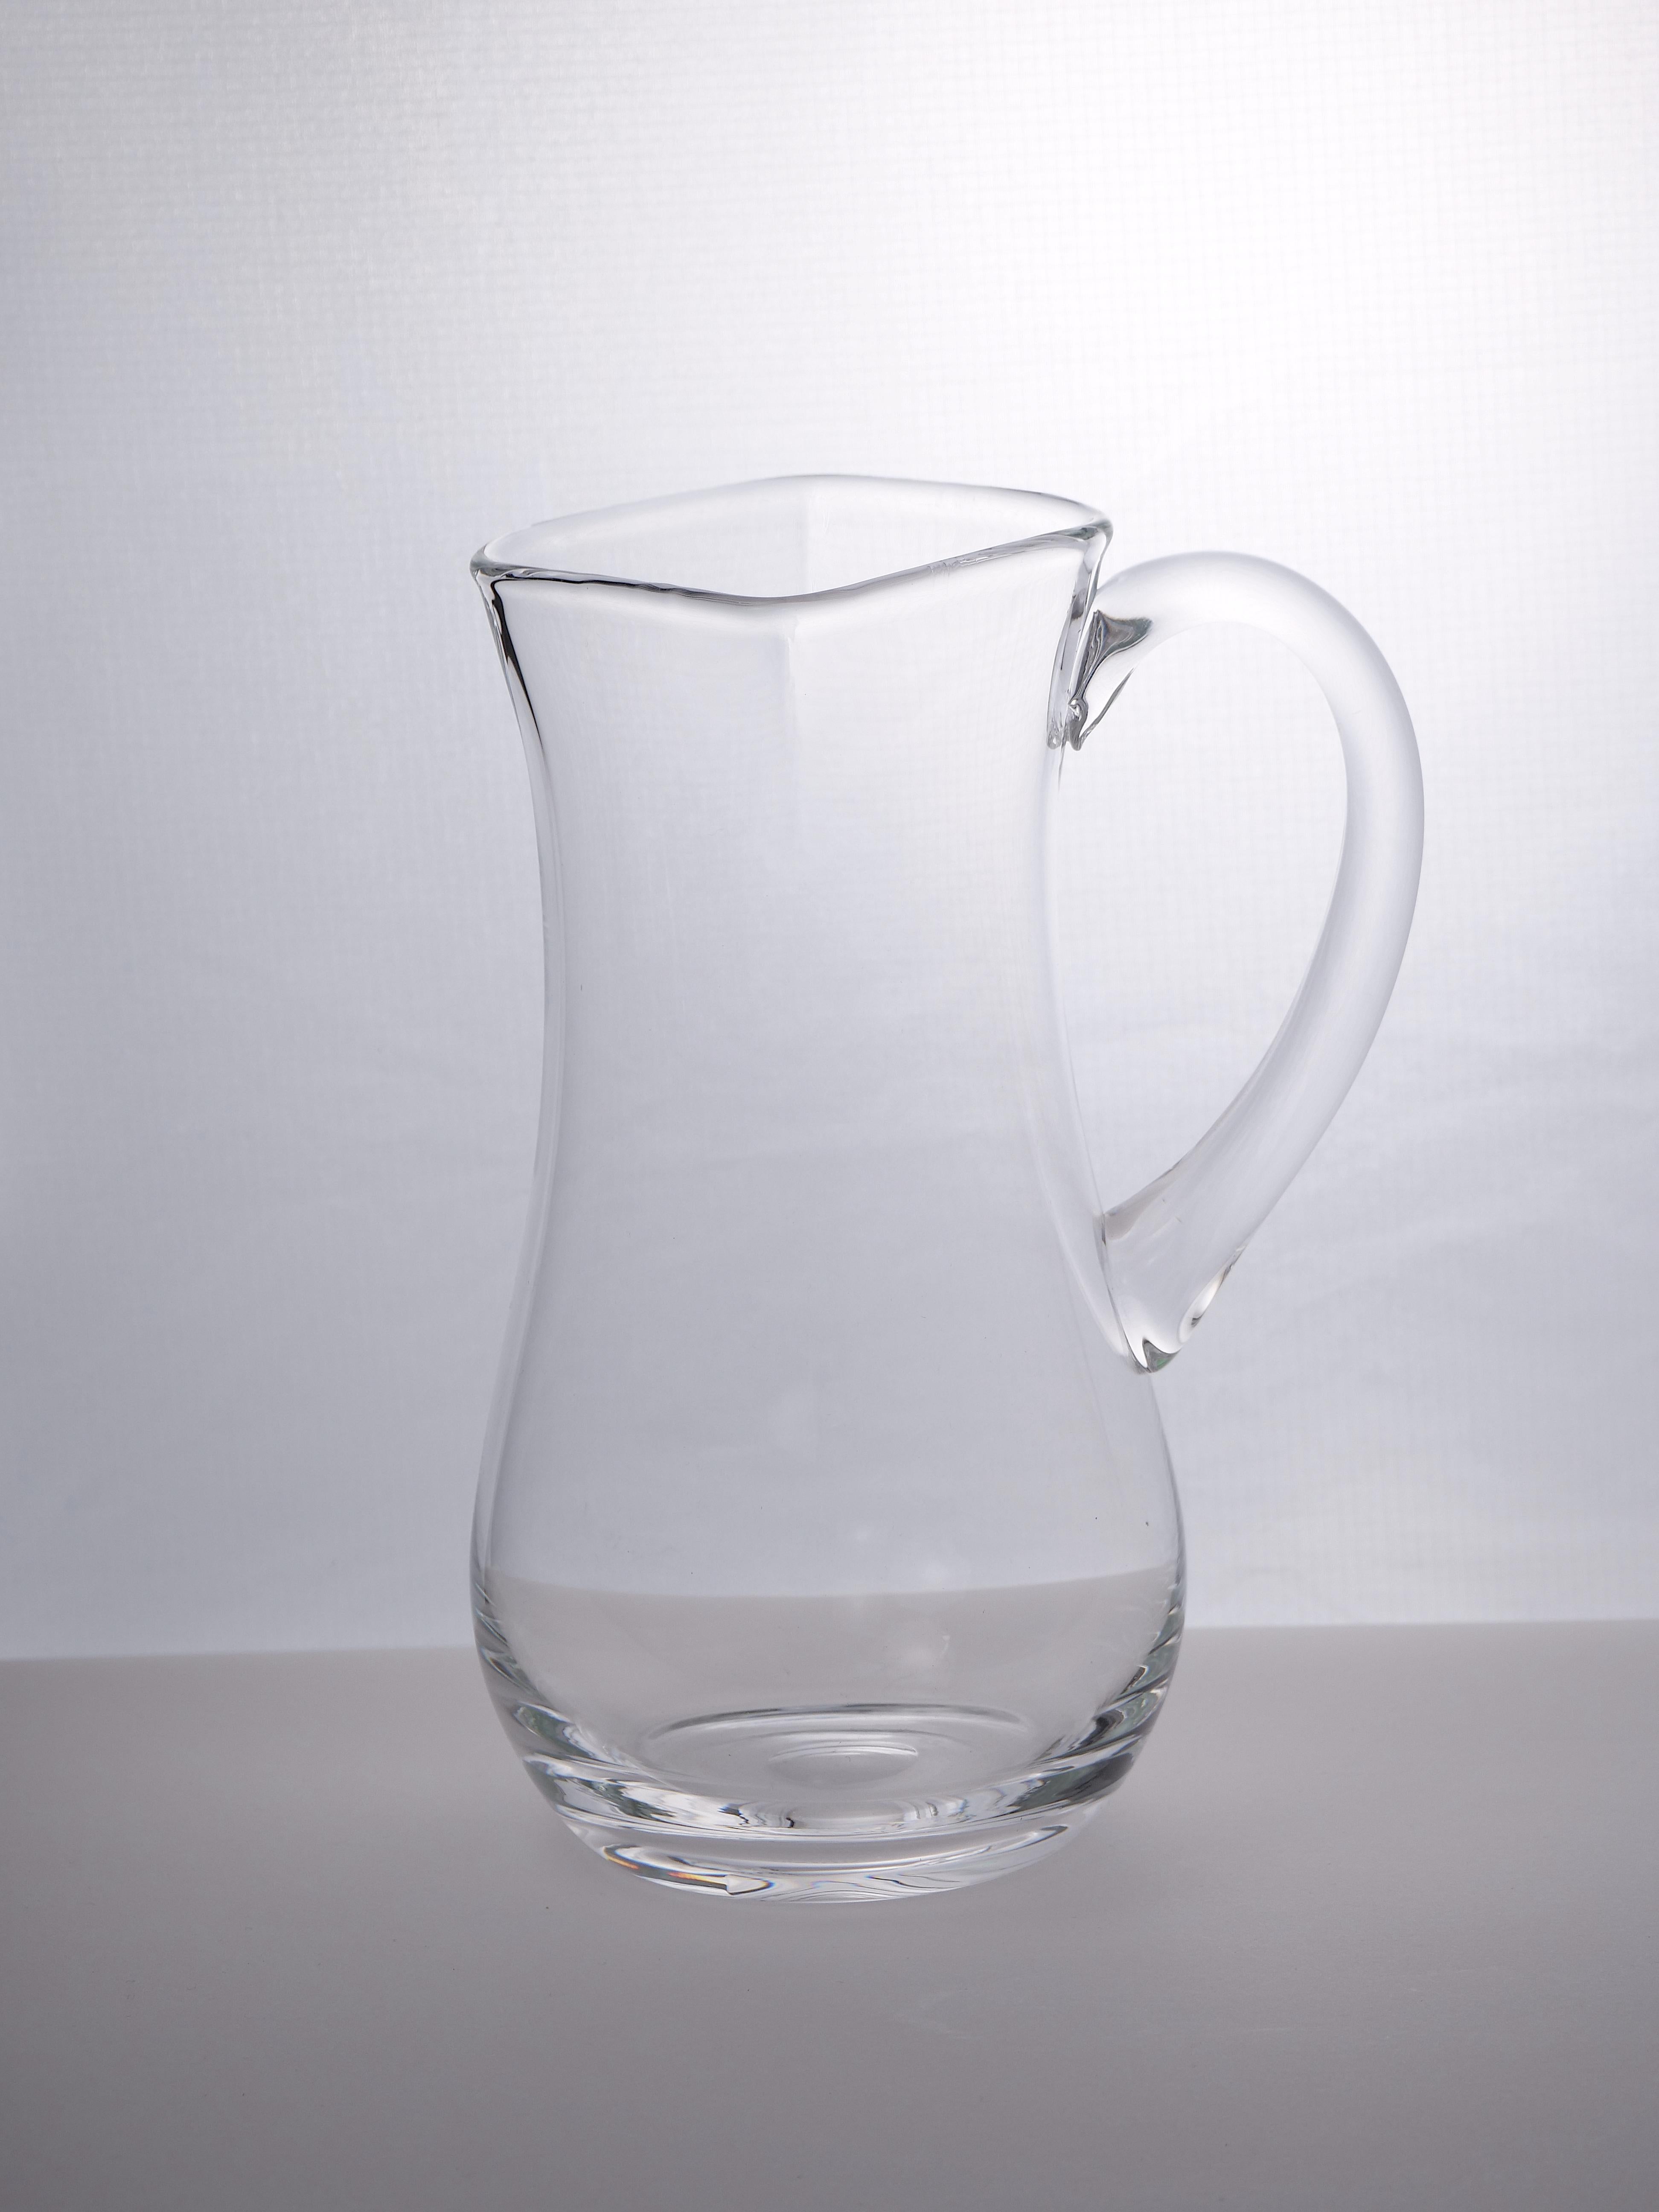 Mid-Century Modern Crystal Barware / Tableware Serving Pitcher In Good Condition For Sale In Tarry Town, NY